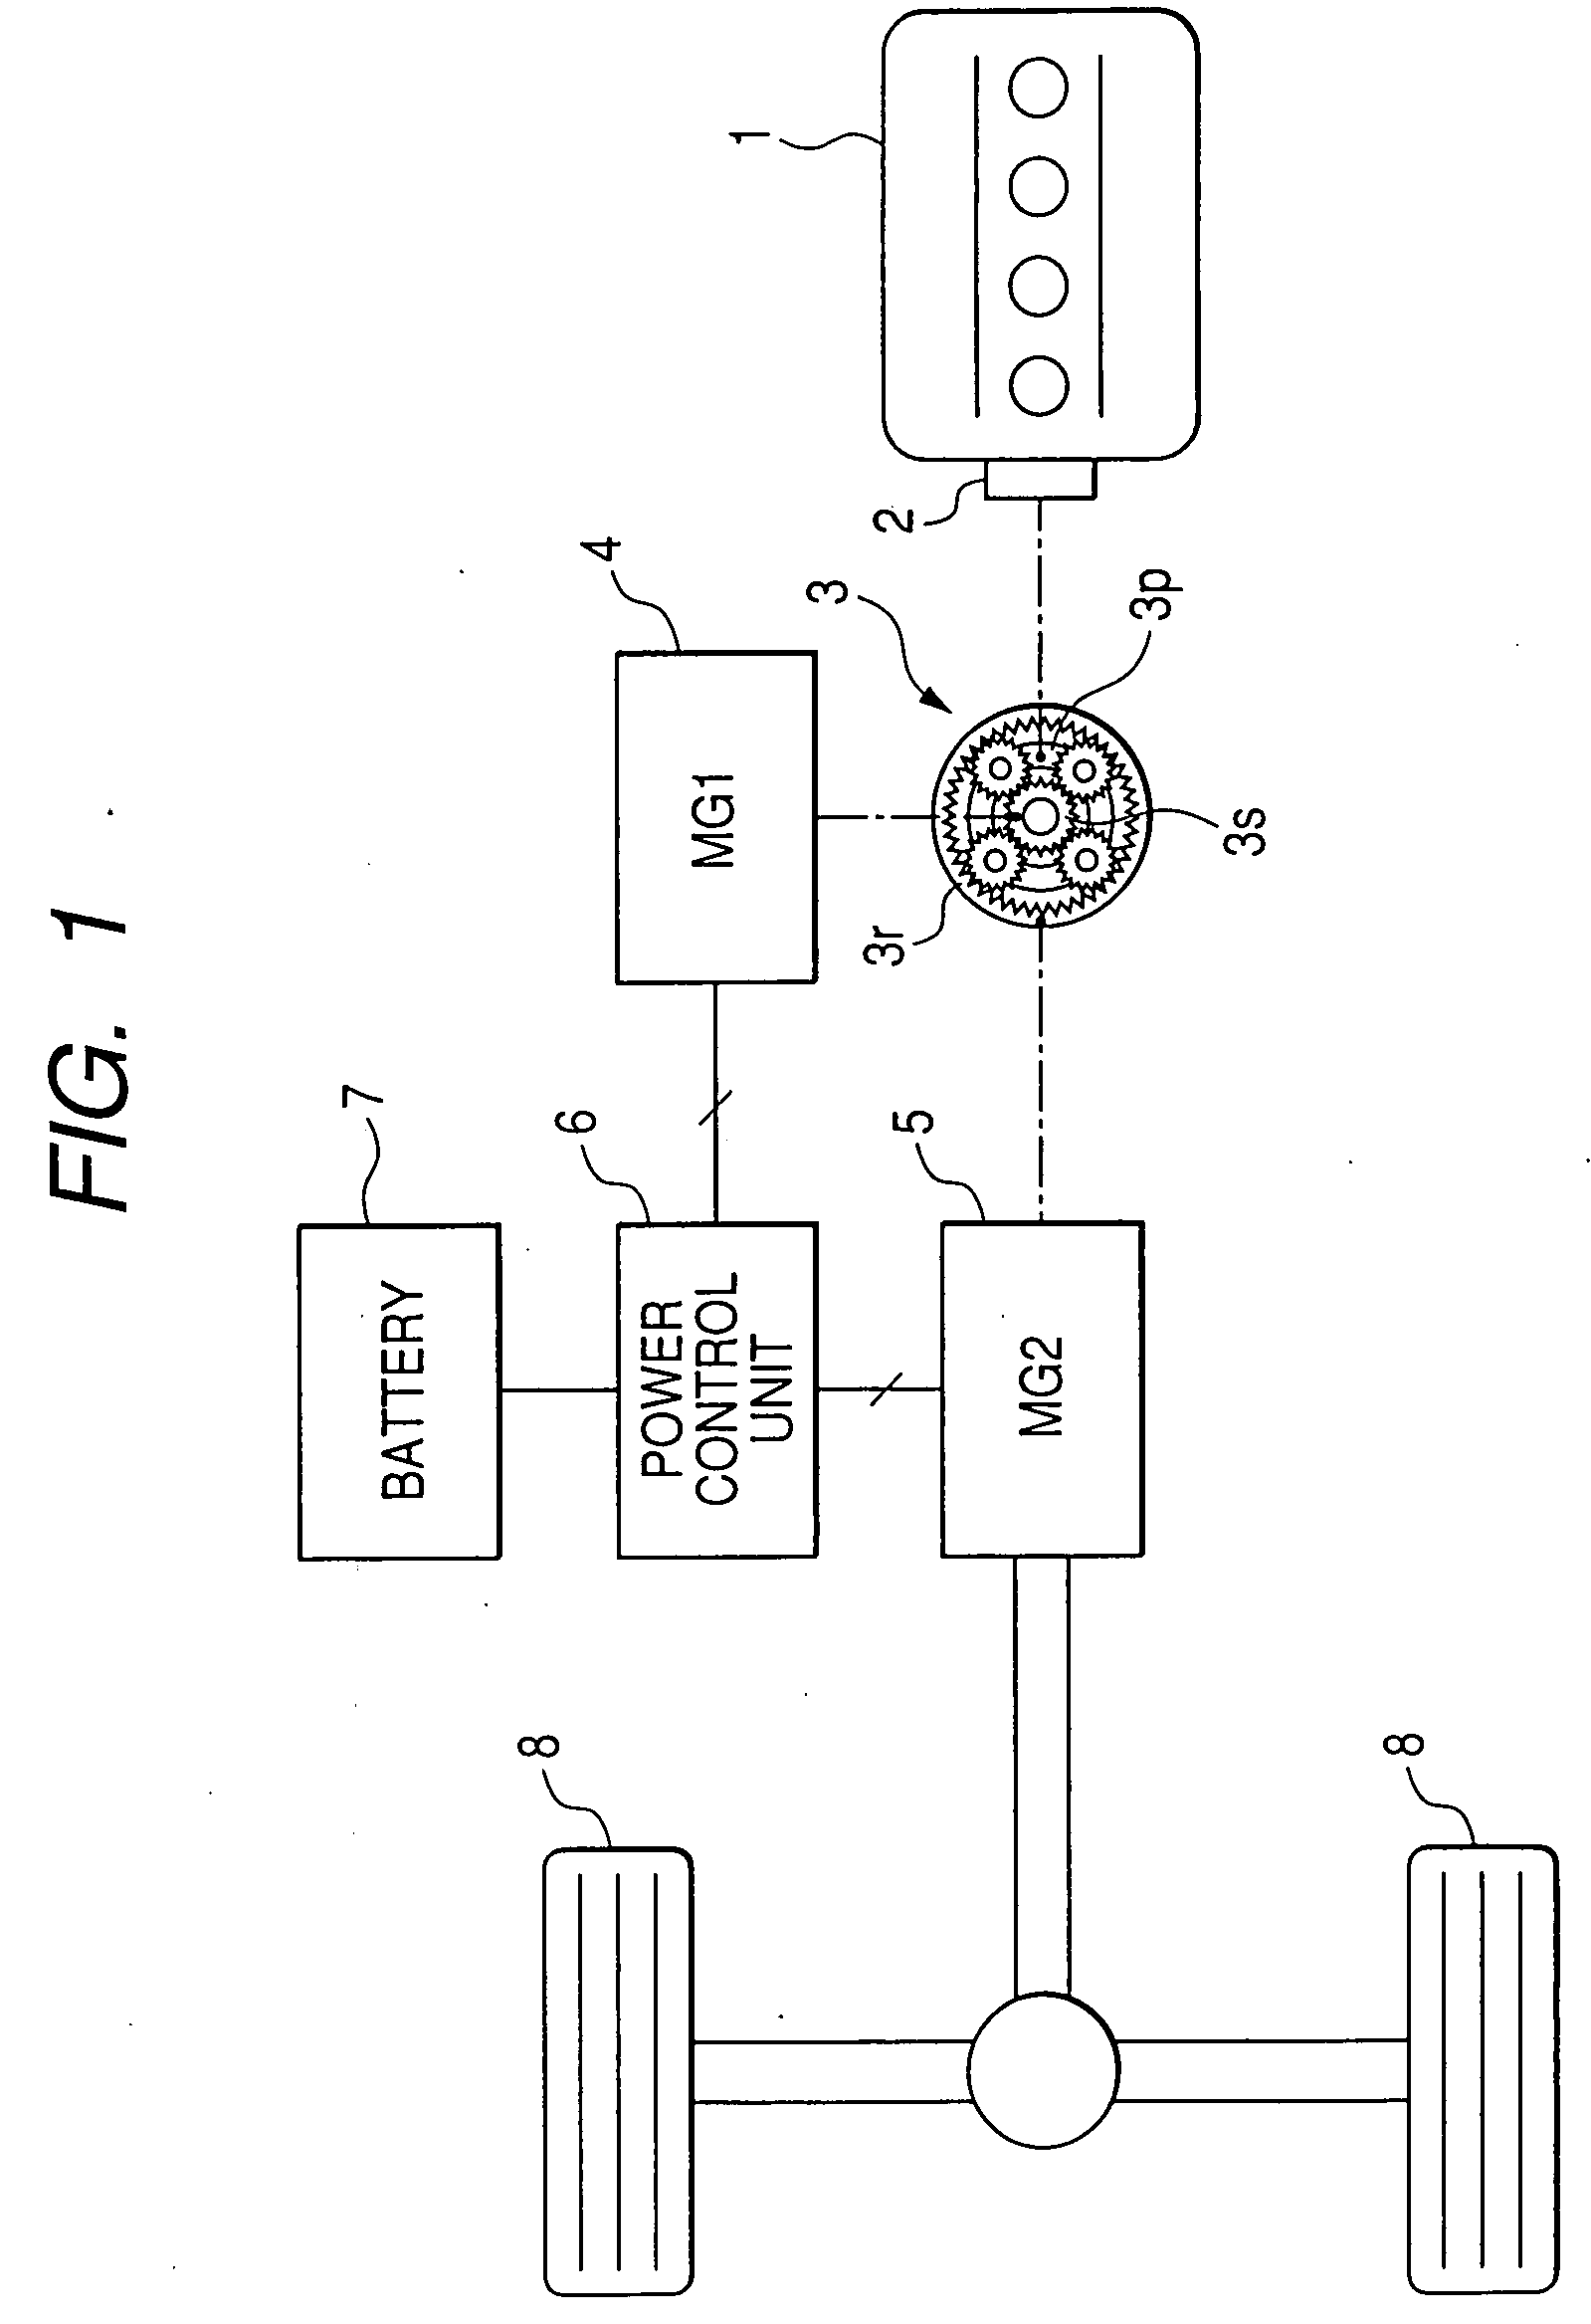 Control system for multiphase rotary electric machine